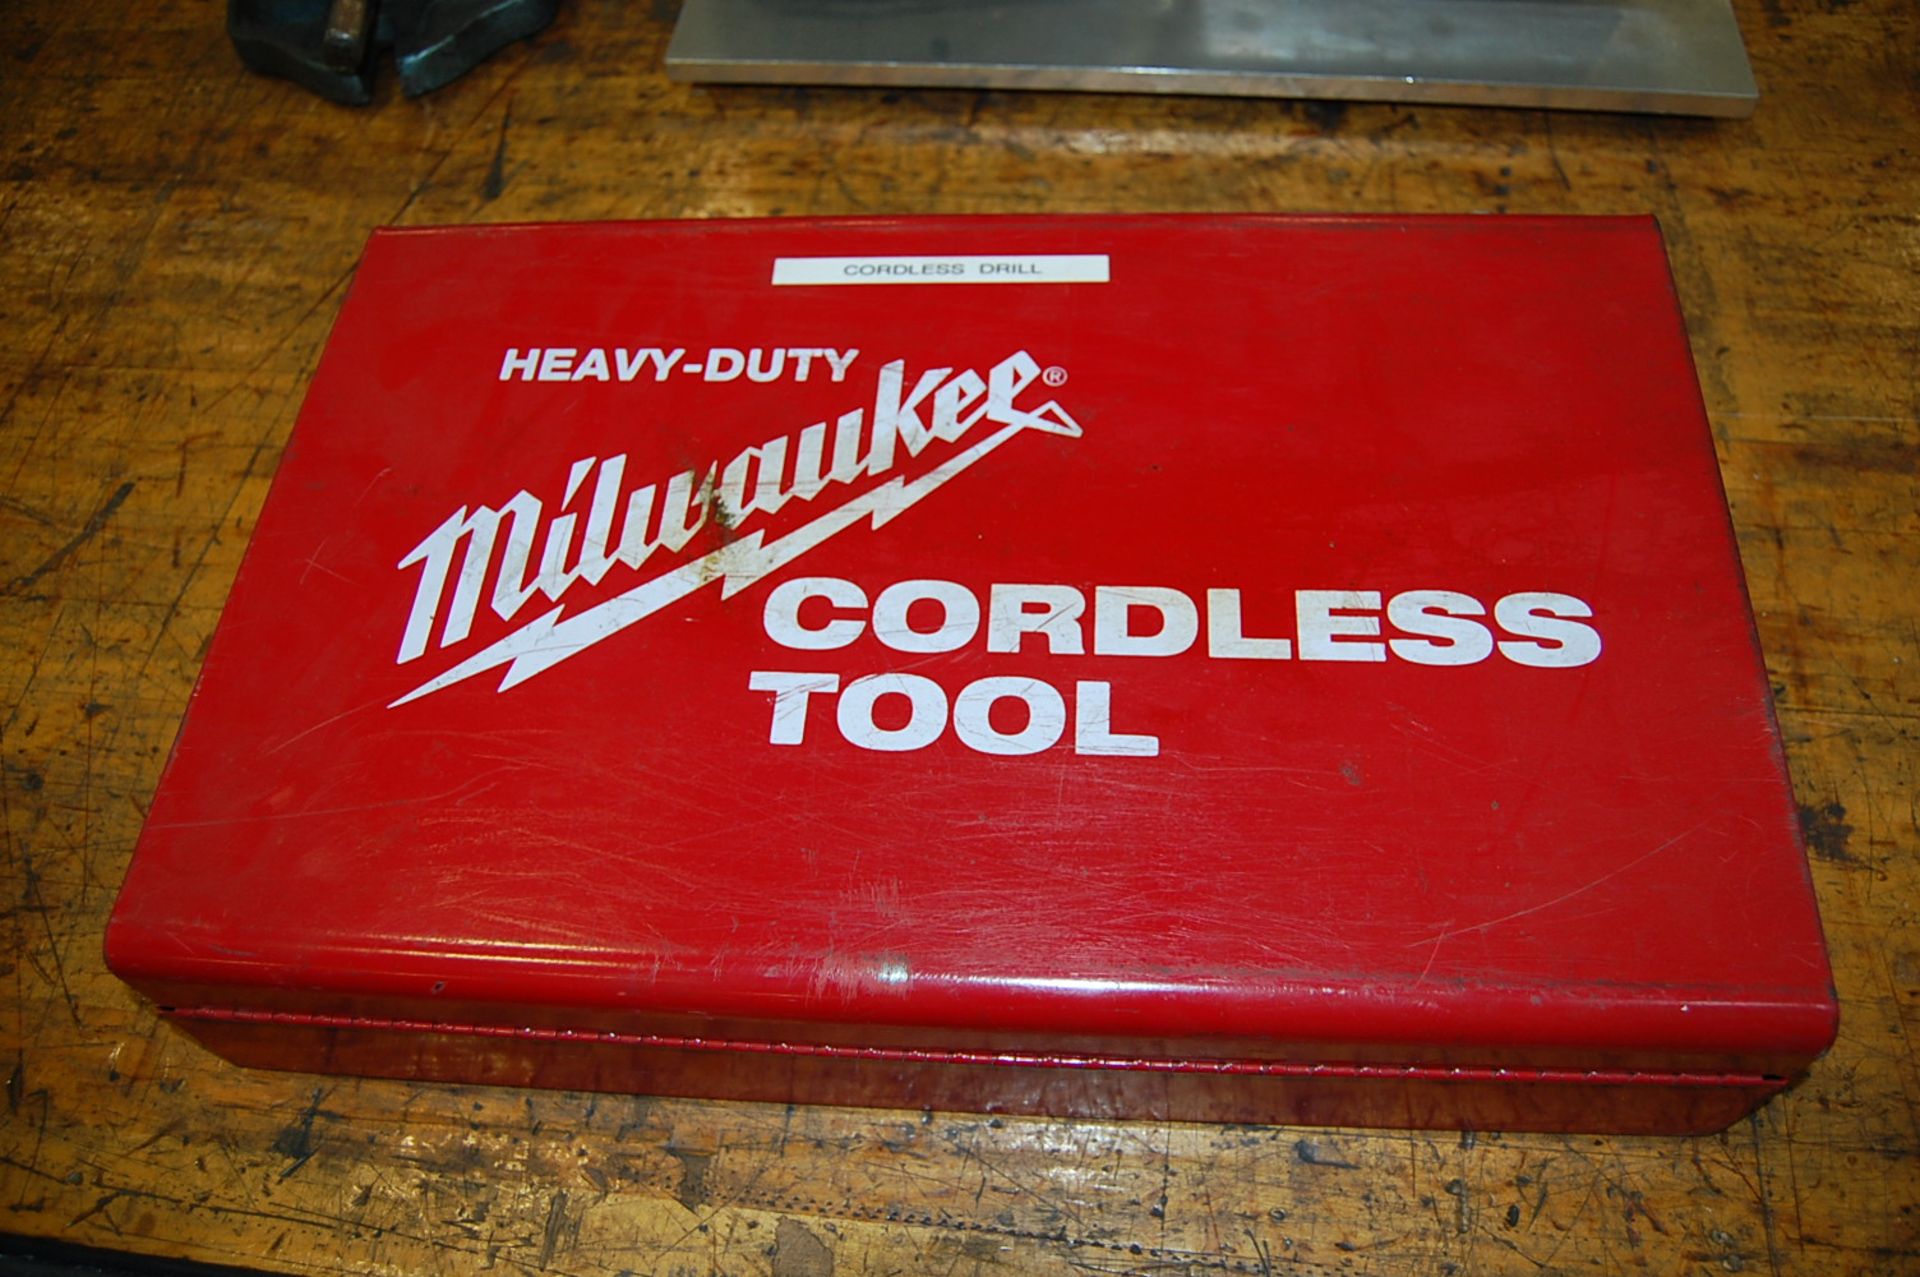 Milwaukee Cat # 0396-1 Cordless 3/8" Driver Drill - Image 4 of 4